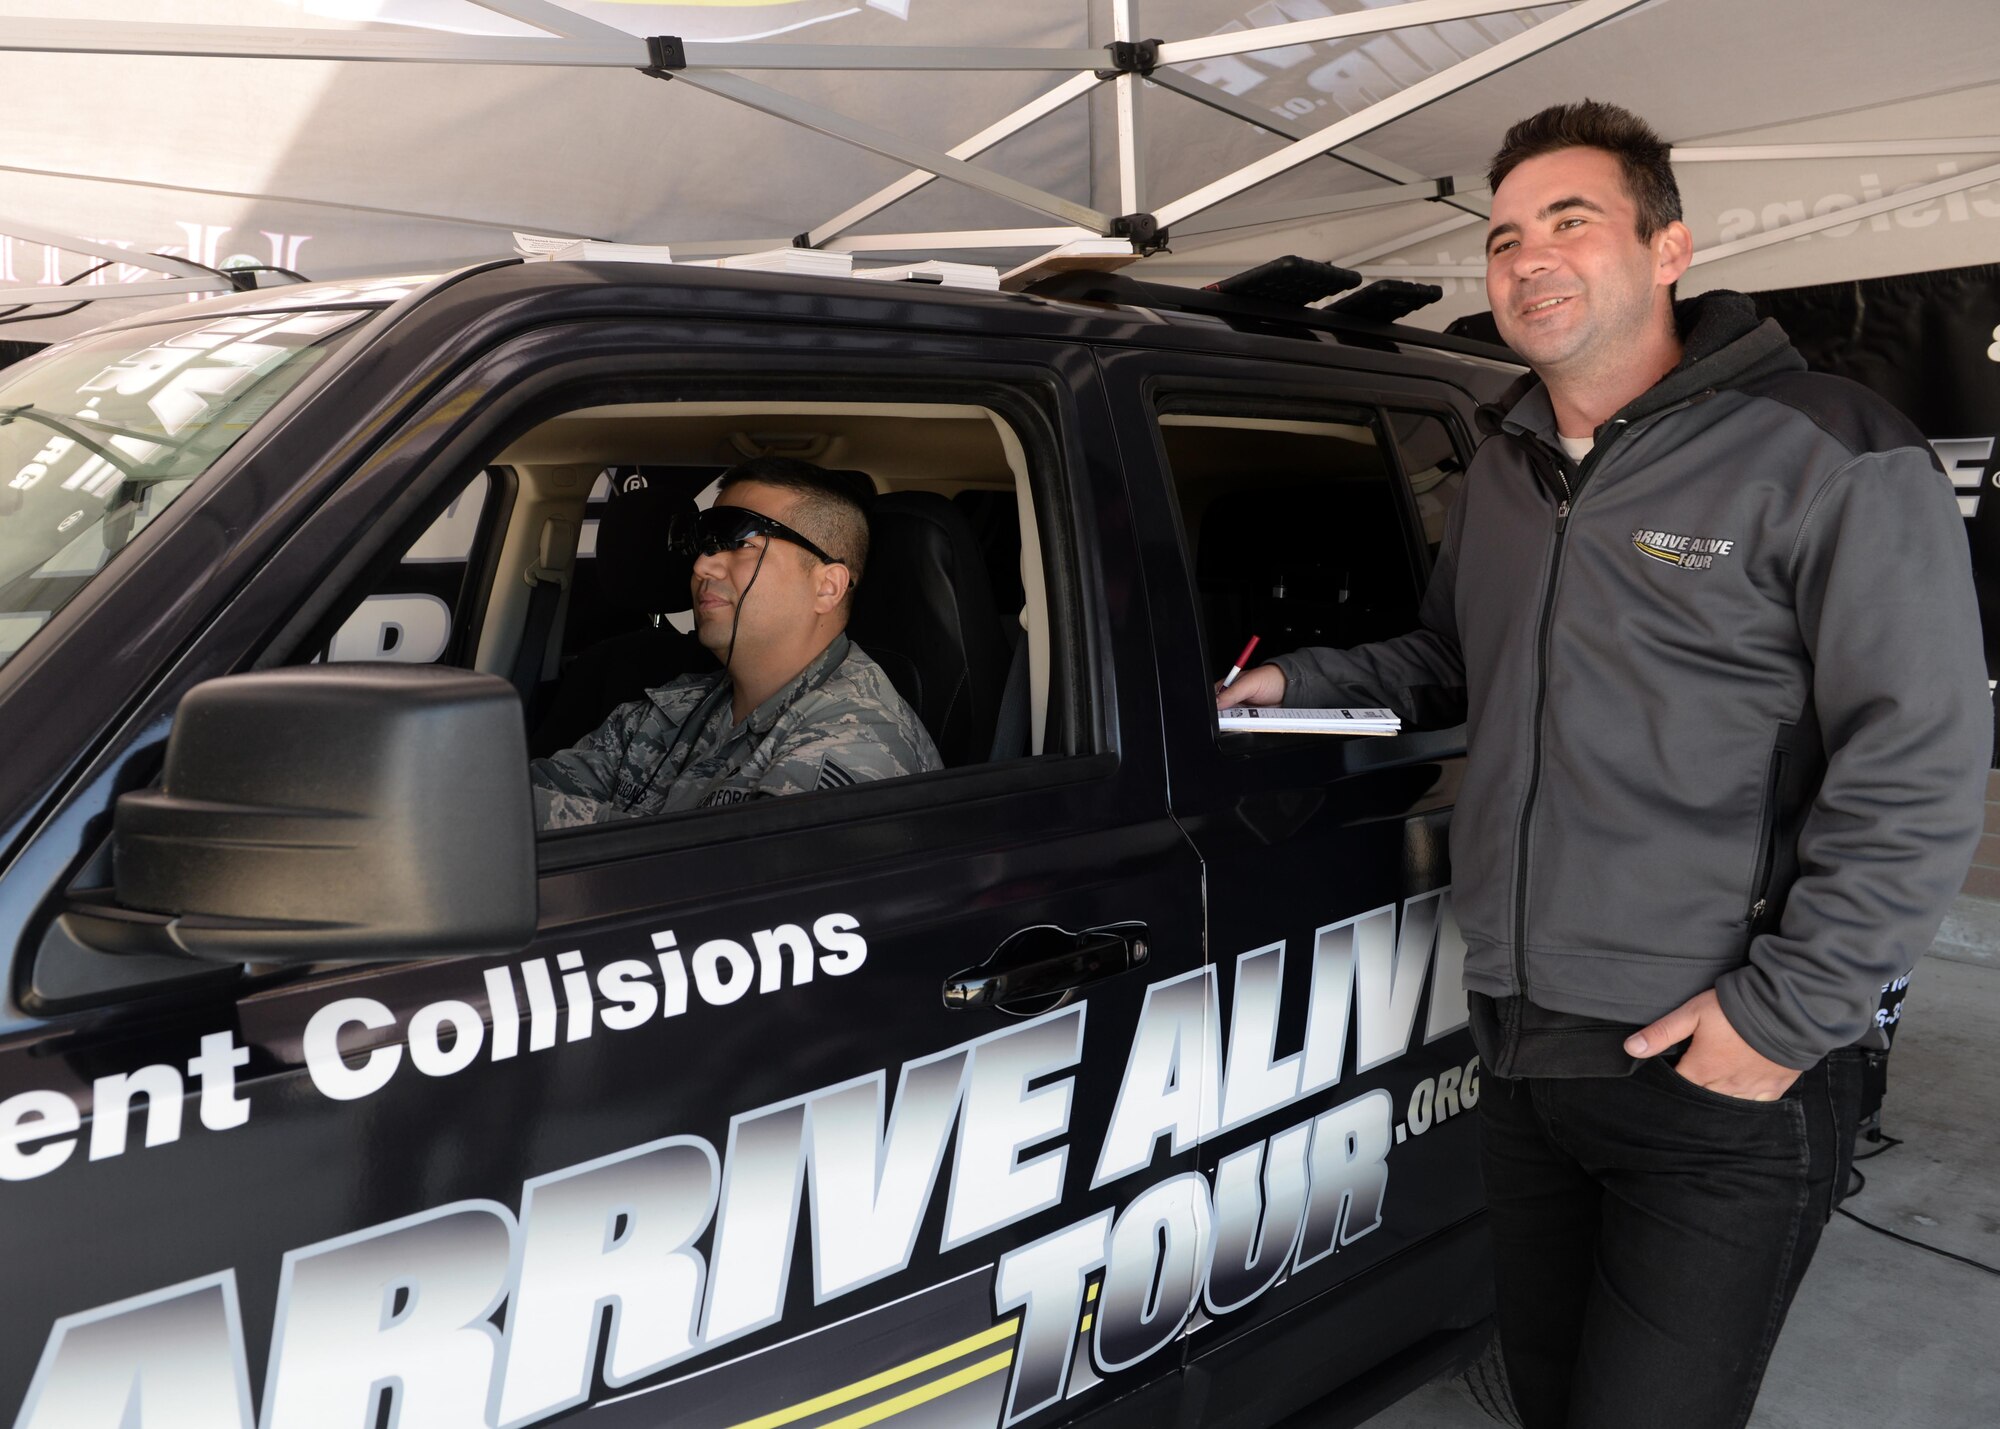 Staff Sgt. Ngoc-Lan (left), 548th Operation Support Squadron GEOINT program manager, operates a virtual simulated vehicle, which emulated being under the influence of alcohol during a demonstration from the Arrive Alive Tour March 29, 2016, at Beale Air Force Base, California. The Arrive Alive Tour provided a demonstration, which gave Airmen the opportunity to experience the realistic effects of driving under the influence, and texting while operating a vehicle.  (U.S. Air Force photo by Senior Airman Ramon A. Adelan)